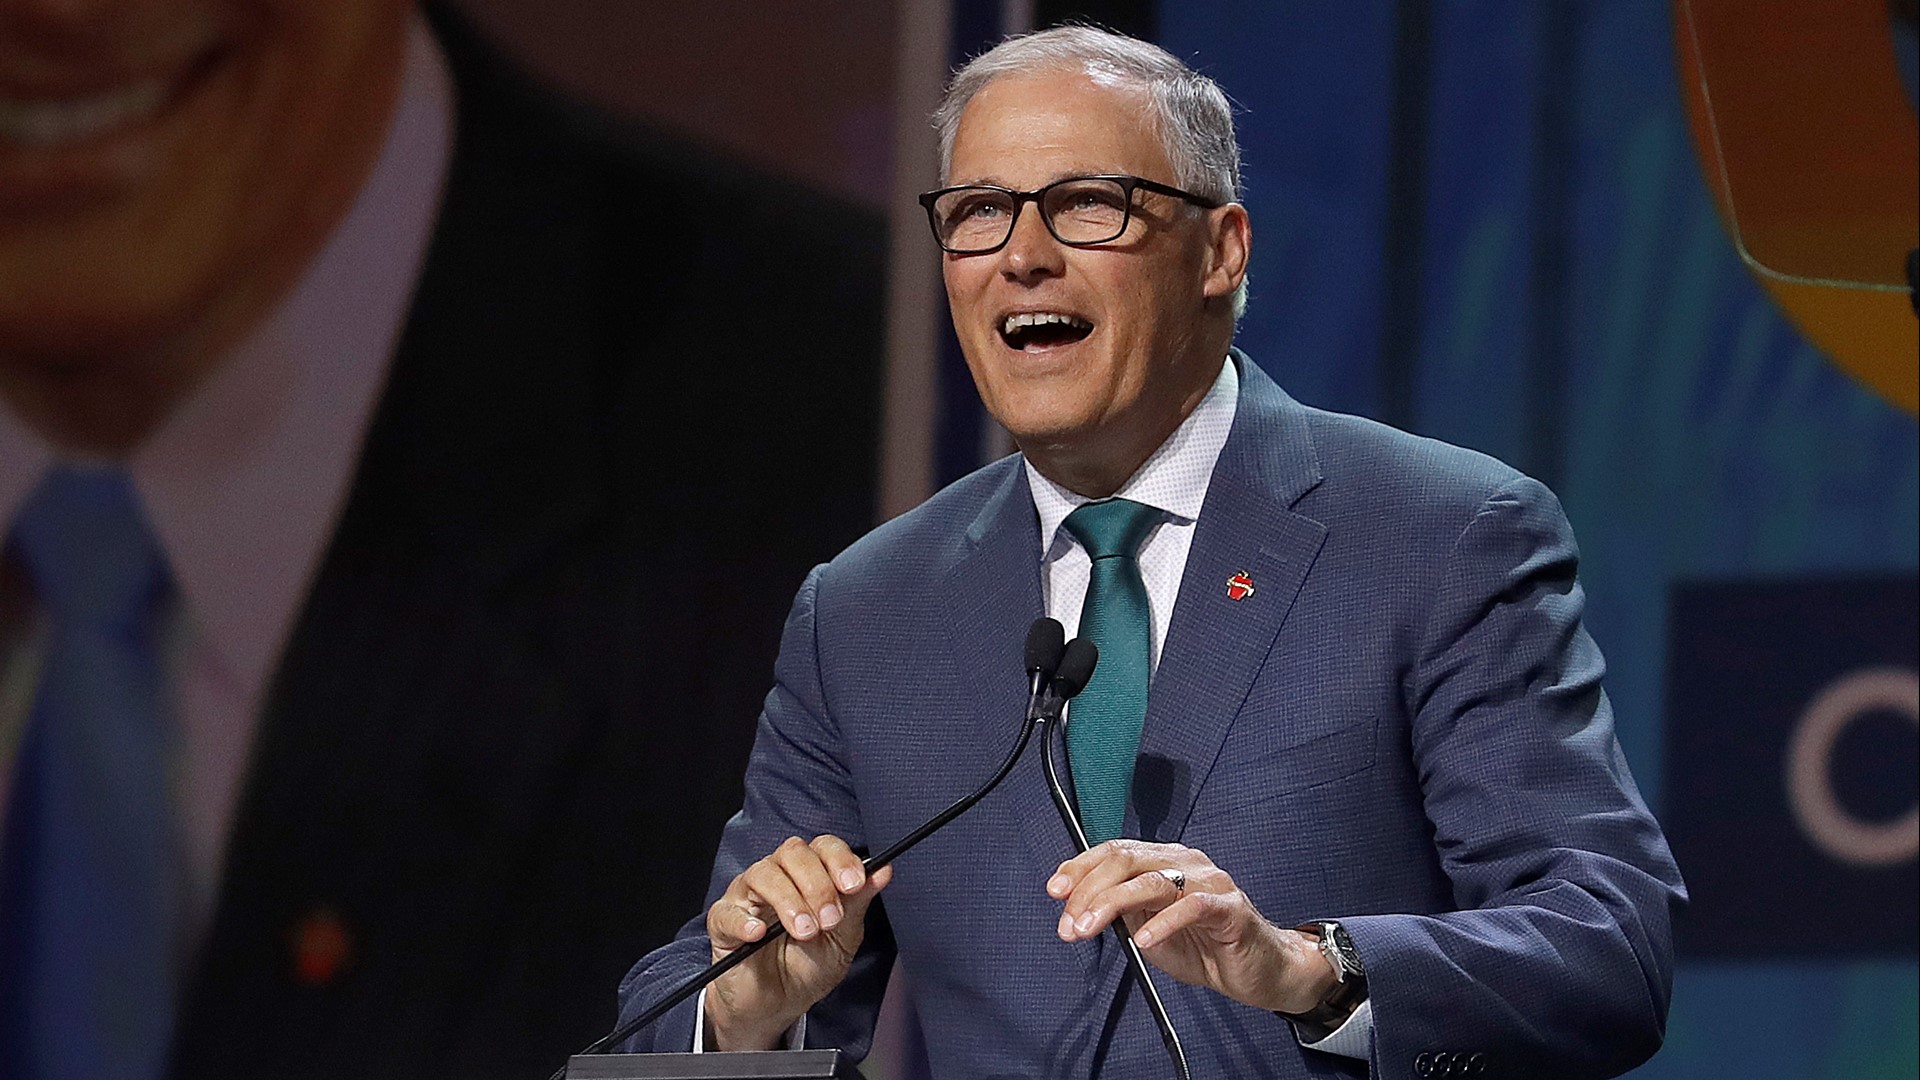 Washington Governor Jay Inslee hopes his climate platform will set himself apart from other candidates during the first Democratic presidential debate.